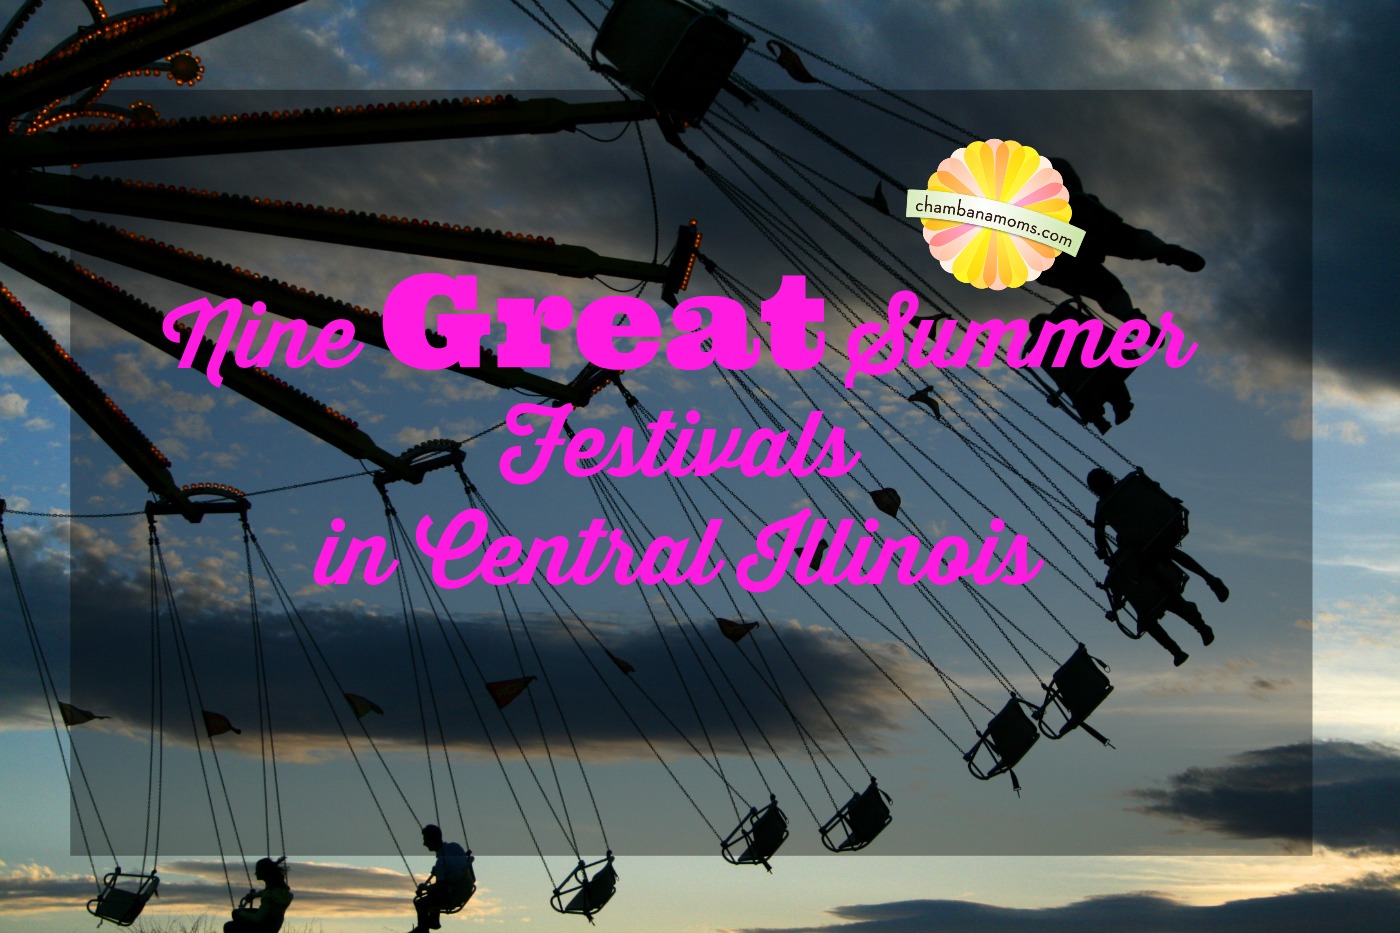 Nine Great Summer Festivals in Central Illinois